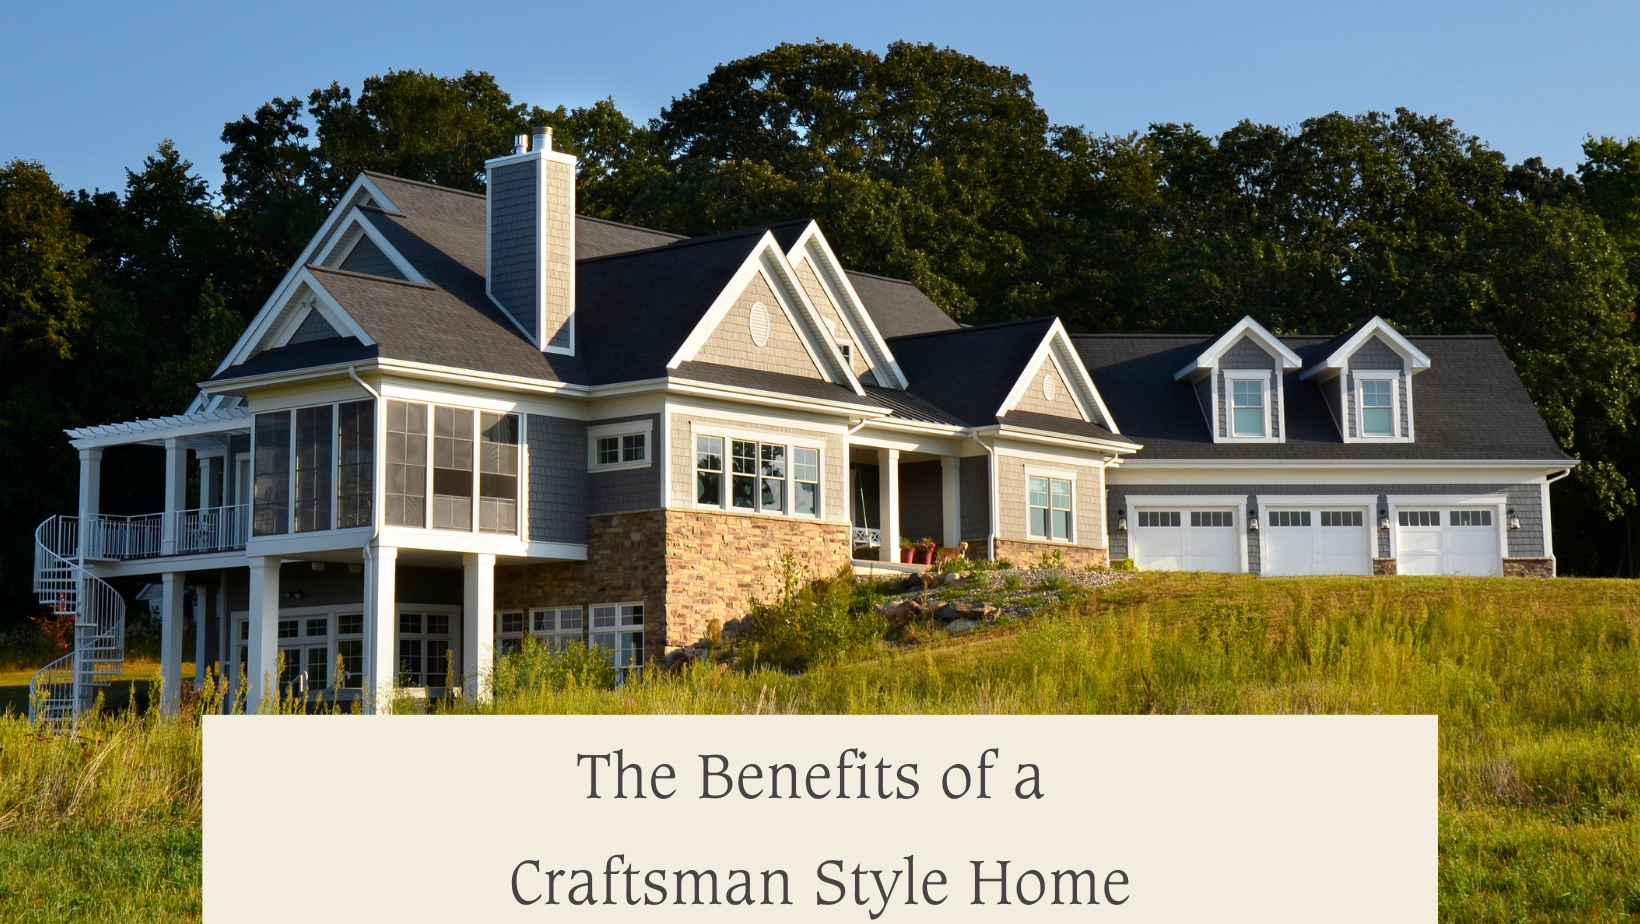 The Benefits of a Craftsman Style Homes